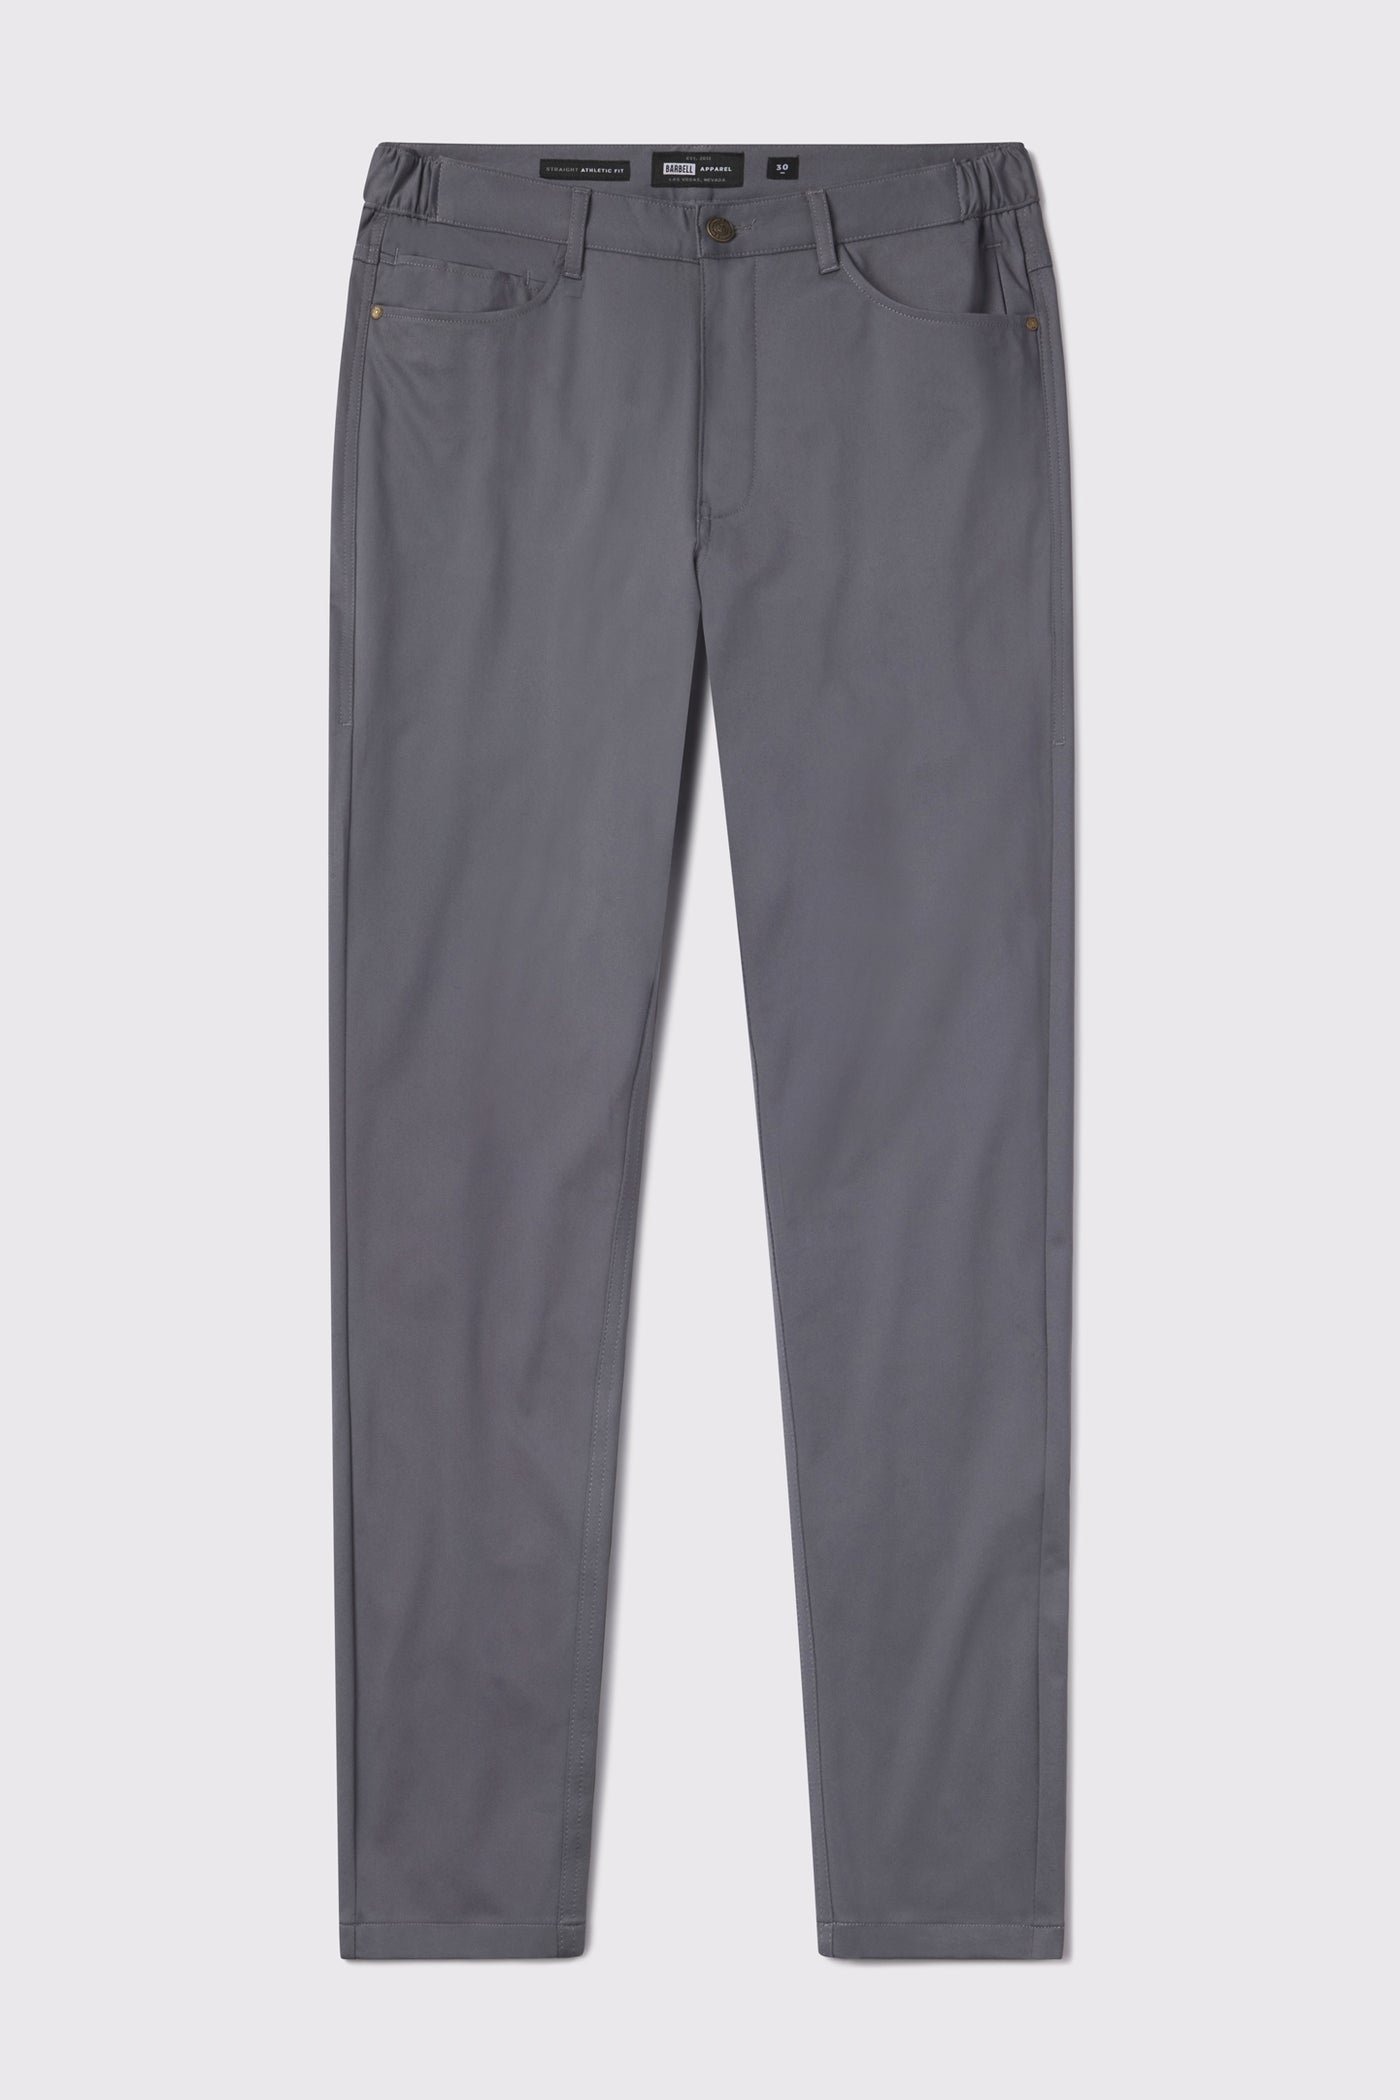 Athletic Fit Stretch Suit Pants Heathered Navy | Mens State & Liberty Dress  Pants - Sartorial Panda